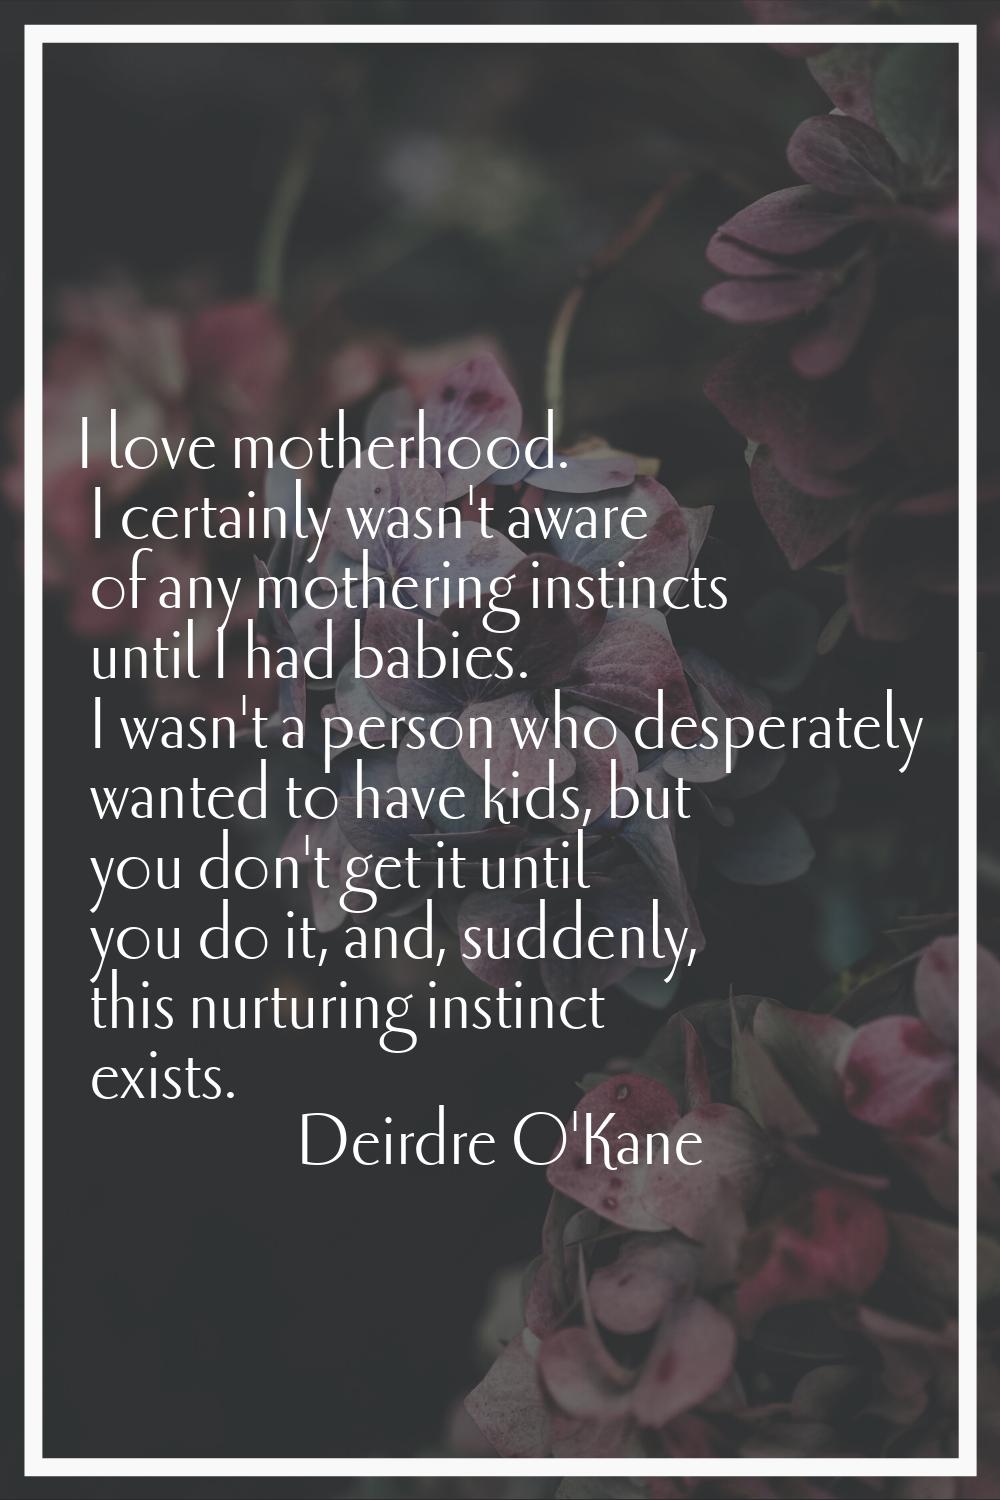 I love motherhood. I certainly wasn't aware of any mothering instincts until I had babies. I wasn't